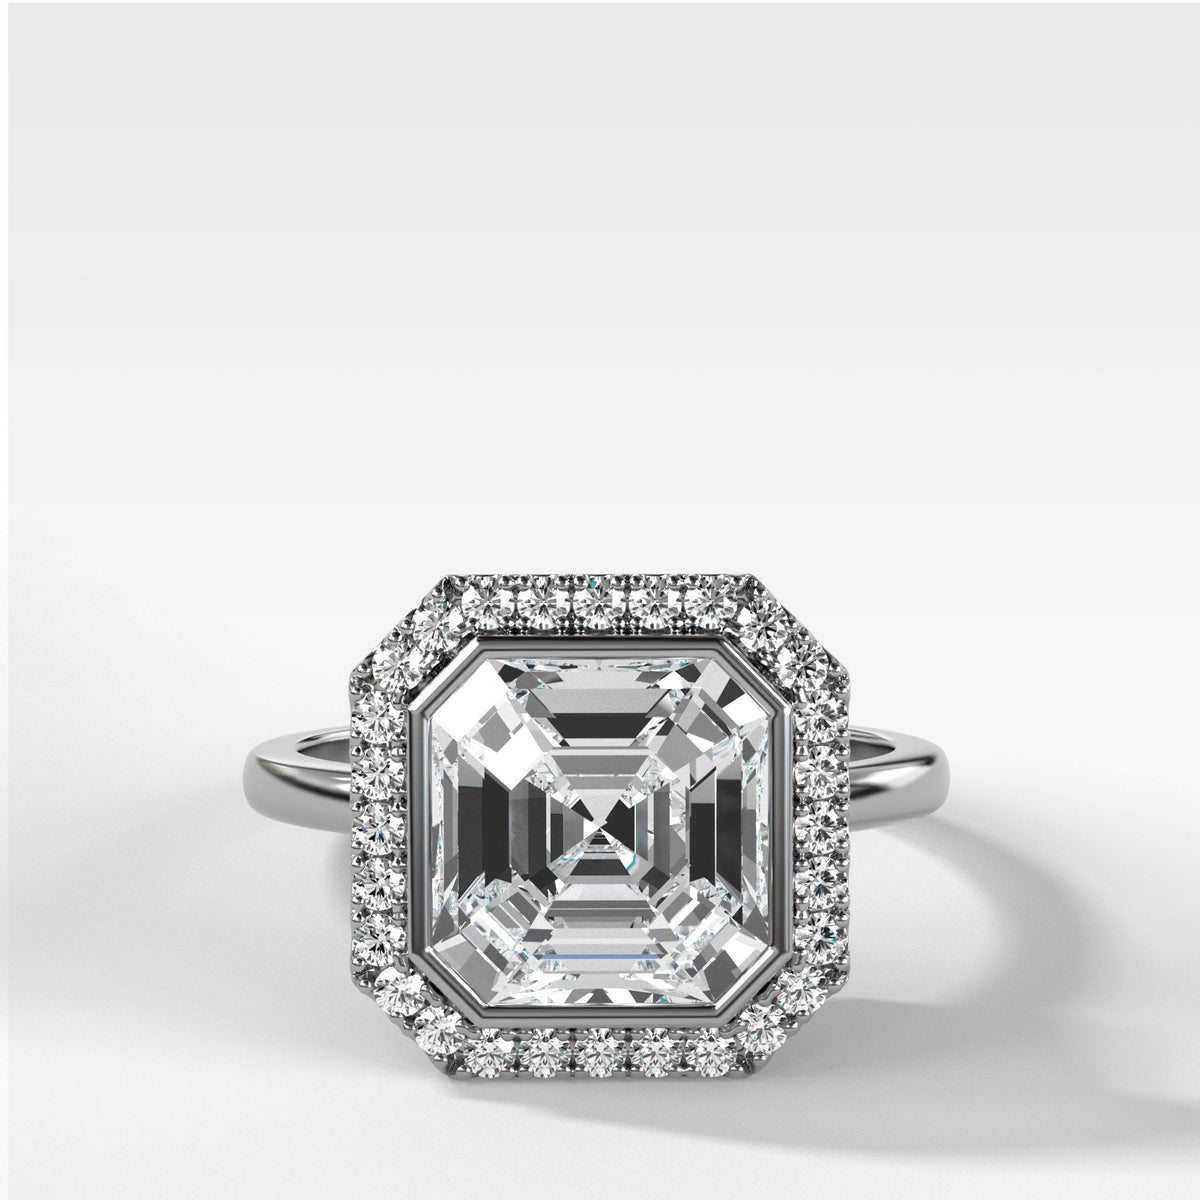 Bezel Set Halo Engagement Ring With Asscher Cut by Good Stone in White Gold